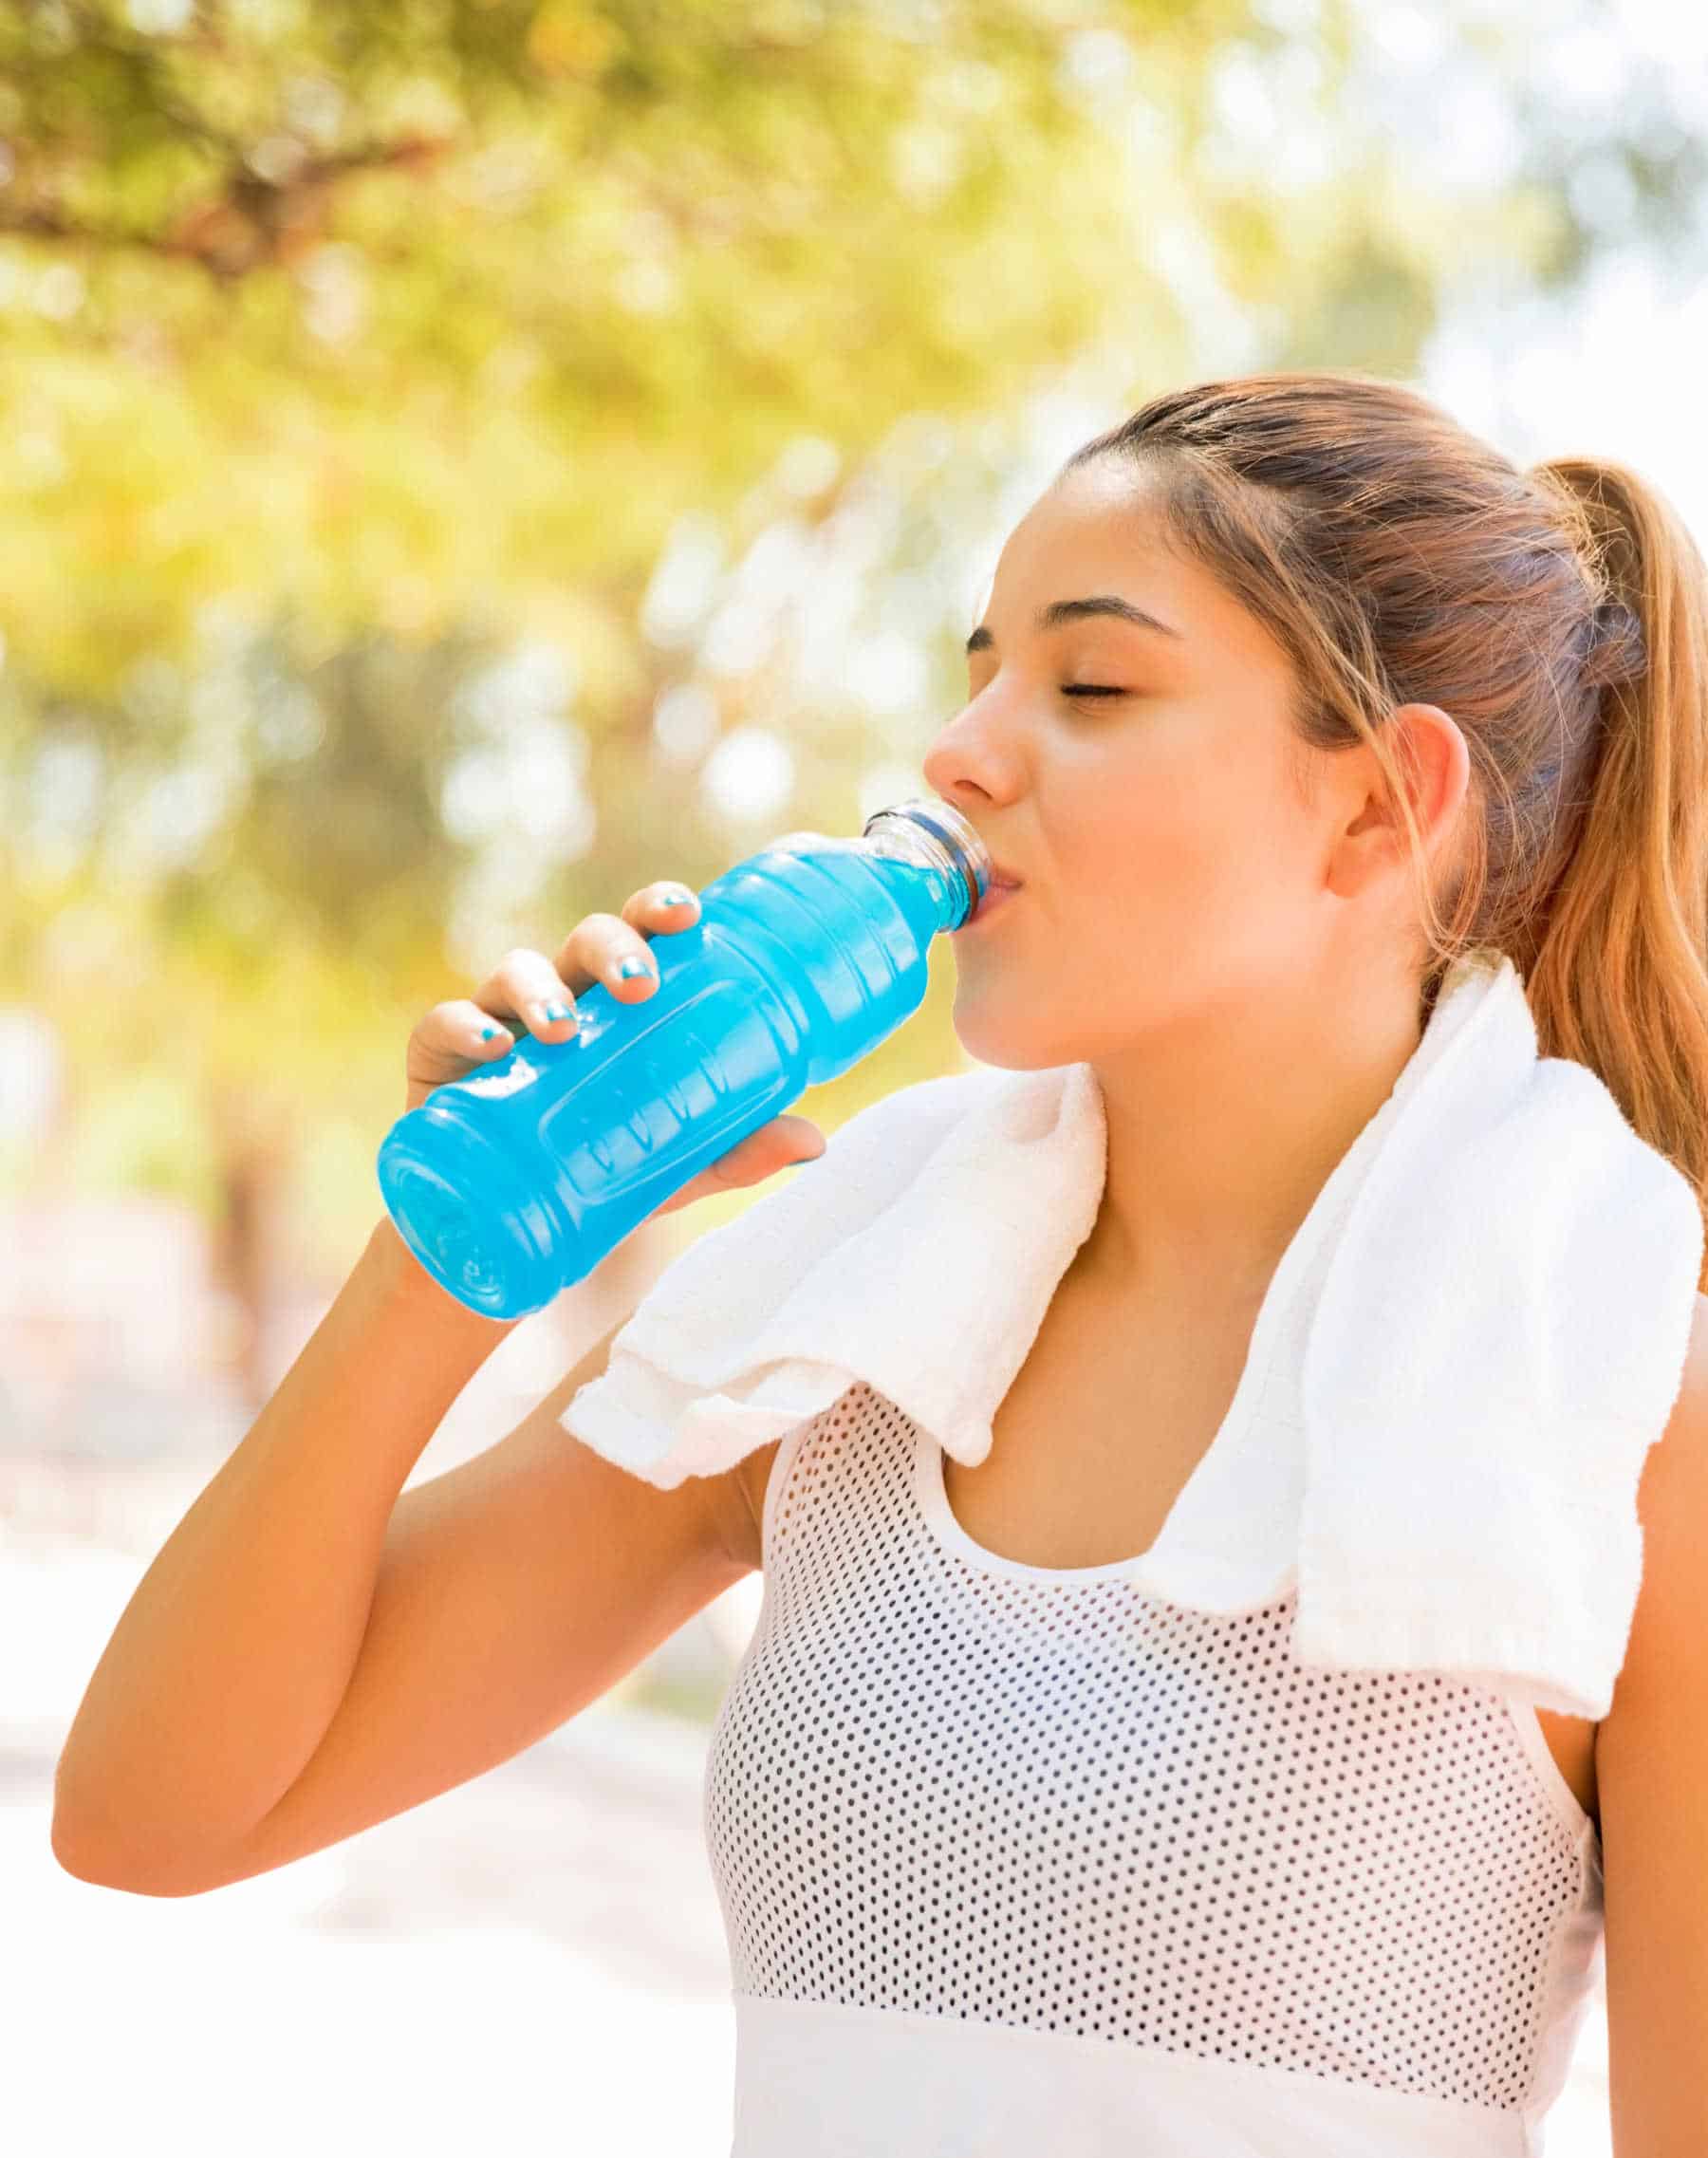 Woman drinking sports drink for hydration, but is it good for you?